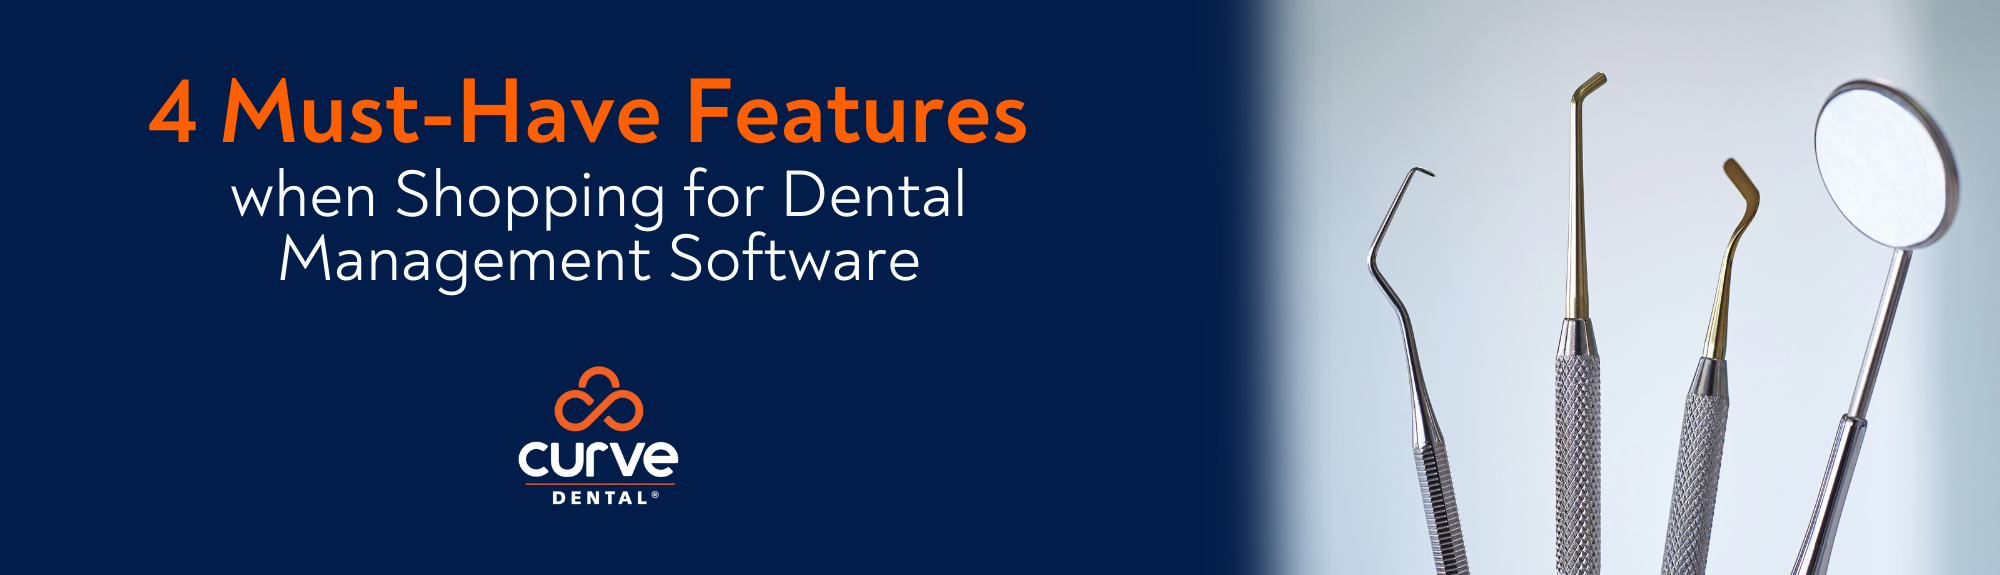 4 Must-Have Features when Shopping for Dental Management Software